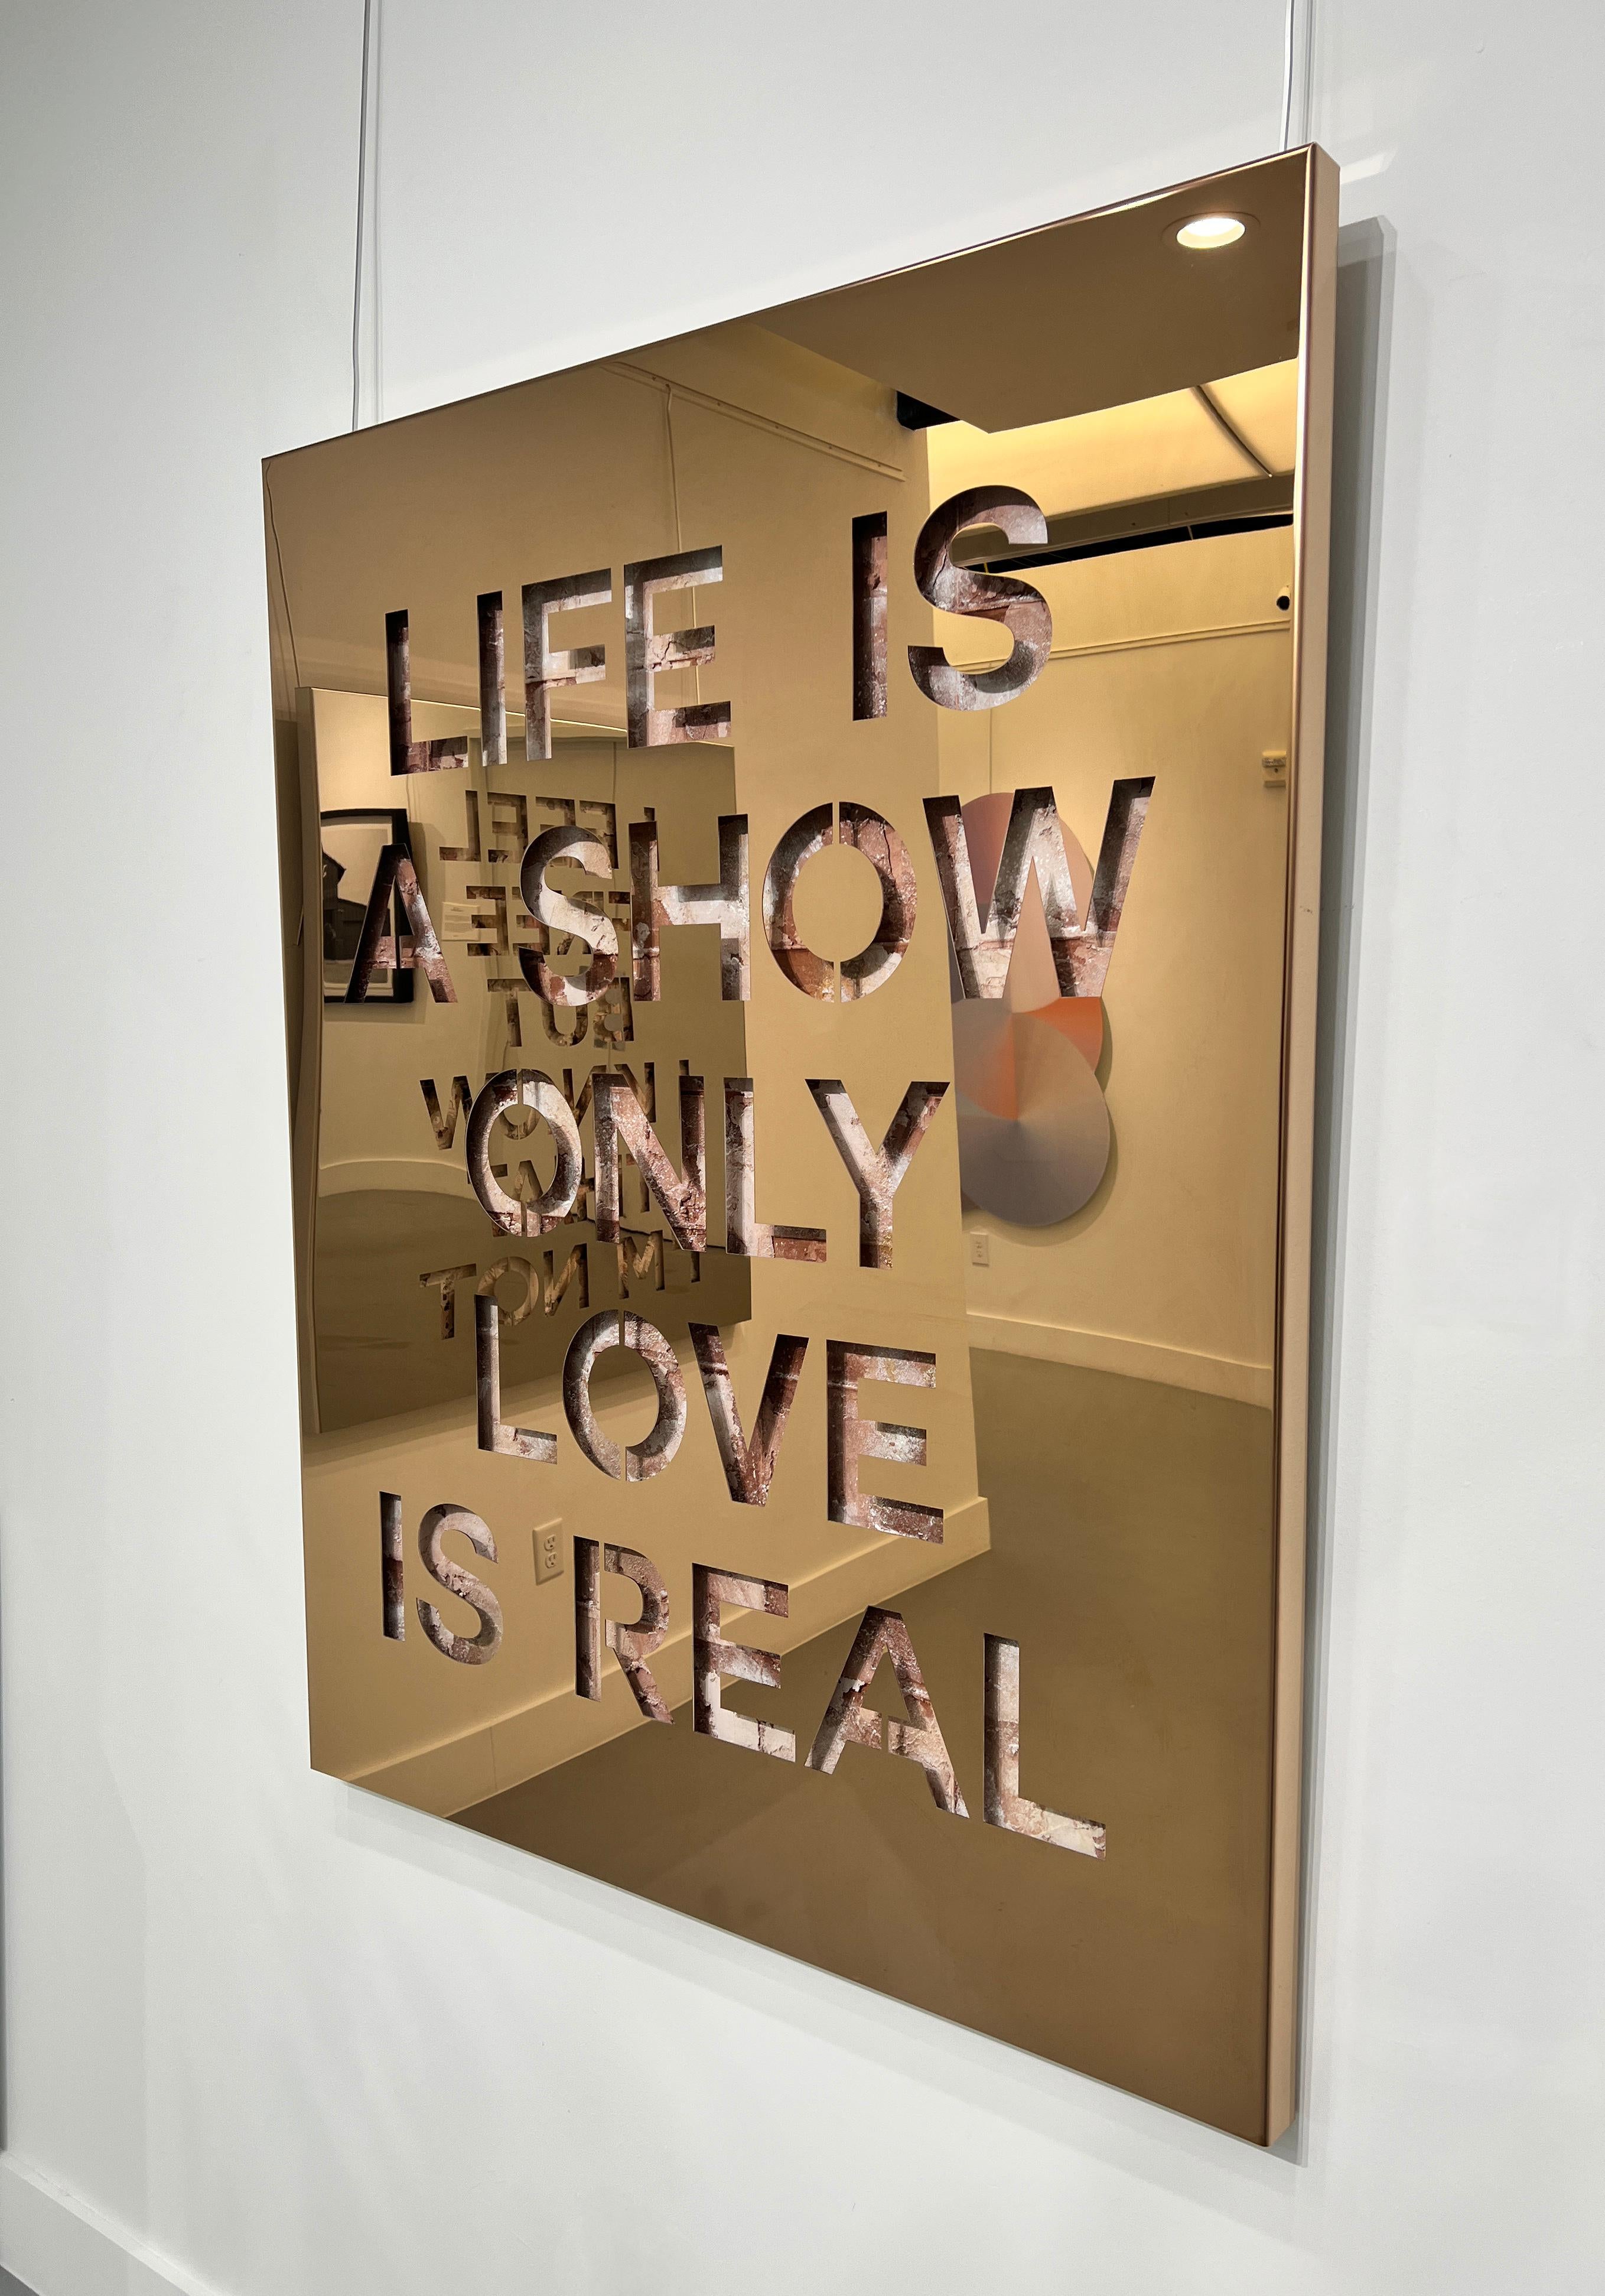 Life Is A Show - Contemporary Sculpture by Joseph